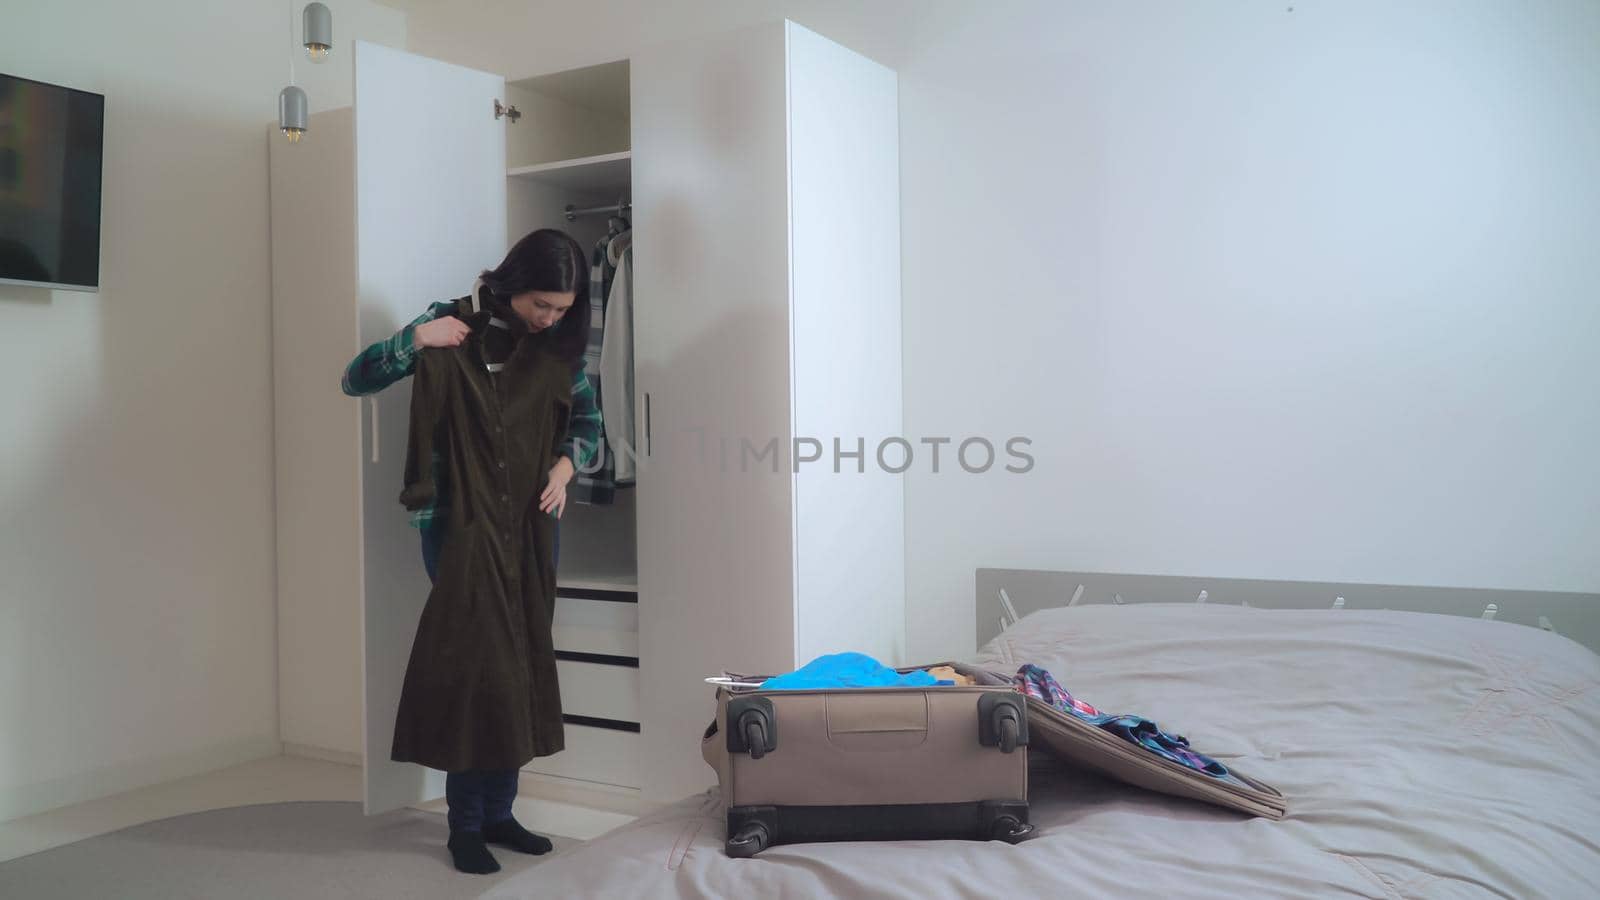 Lady try on dress and put it in suitcase. Young woman wearing in casual clothes packing bag planning vocation. Caucasian girl with black hair in apartment.